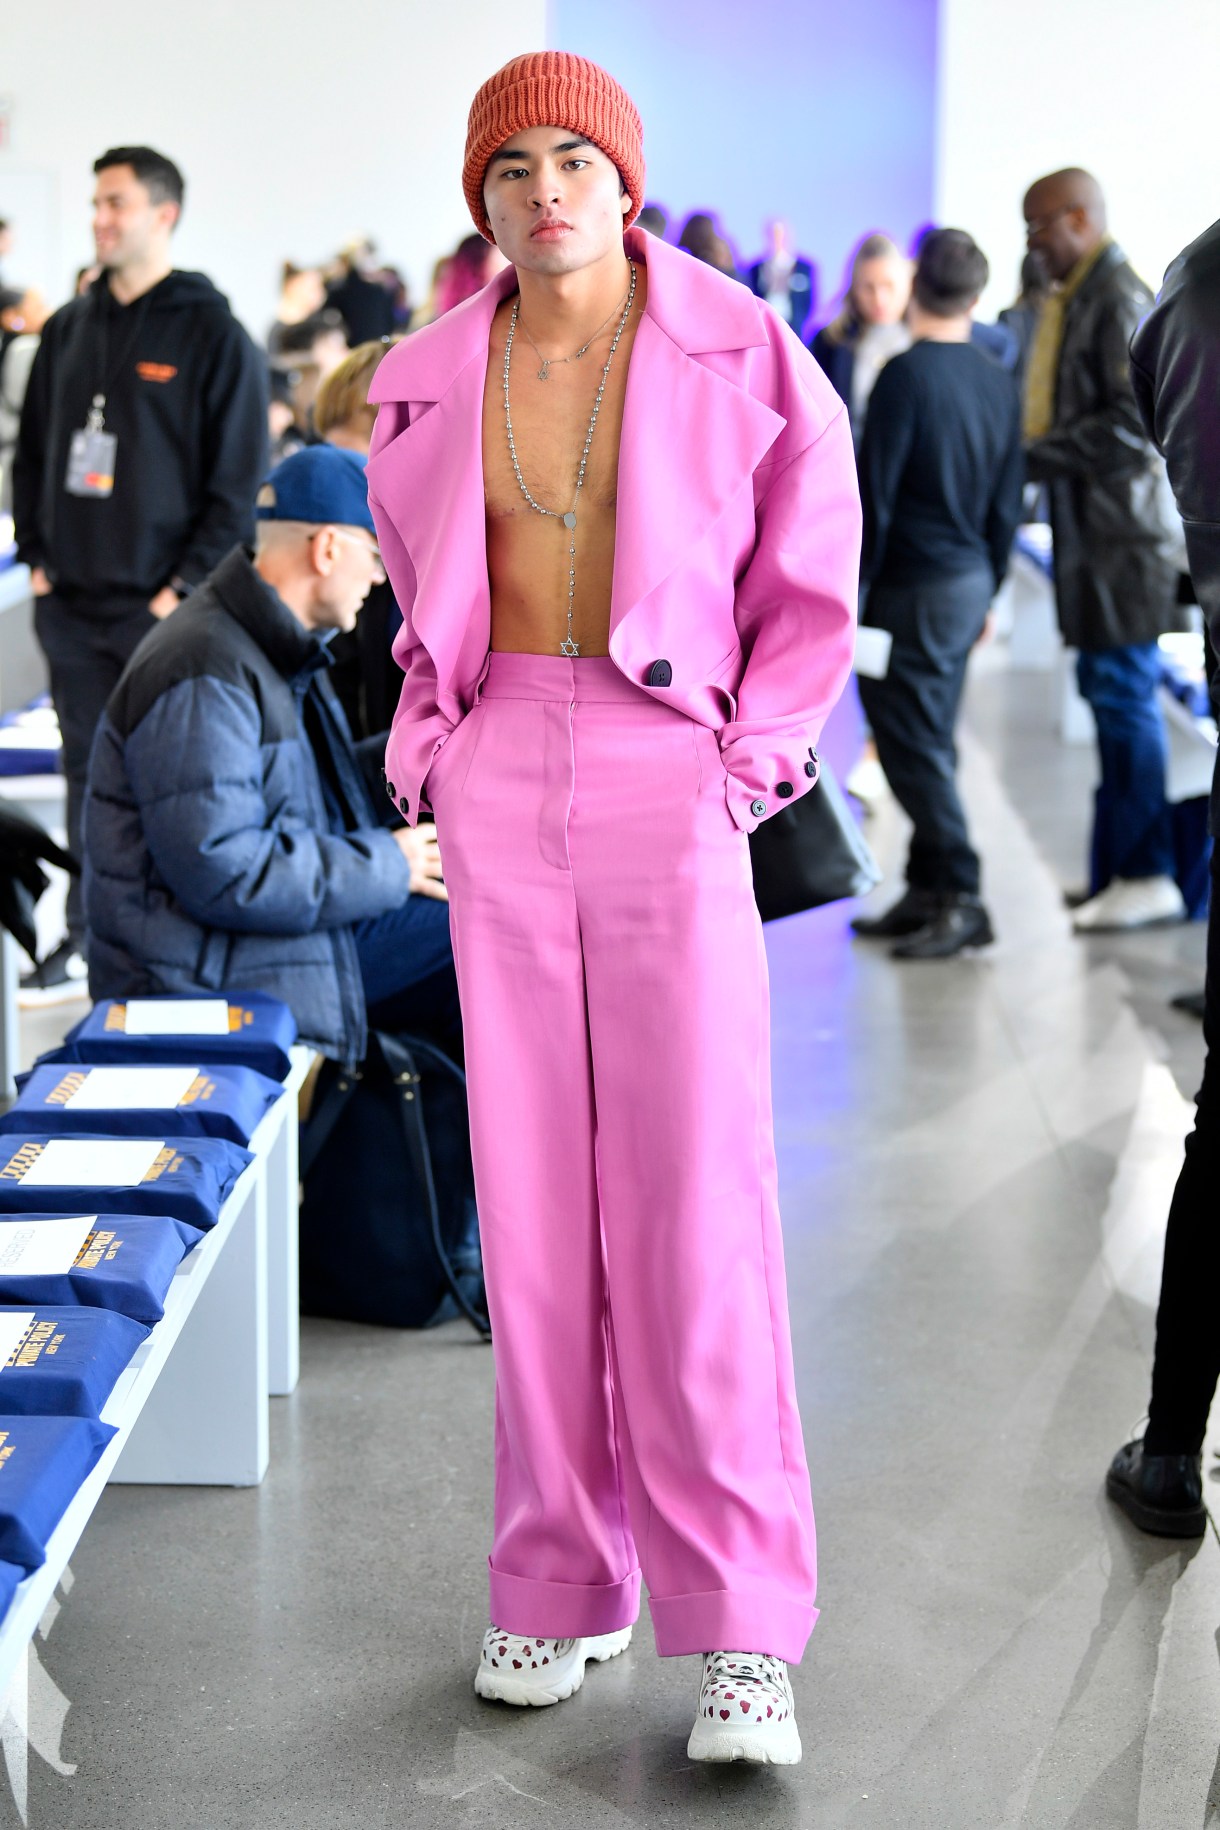 Chella Man in a hot pink suit with chunky shoes